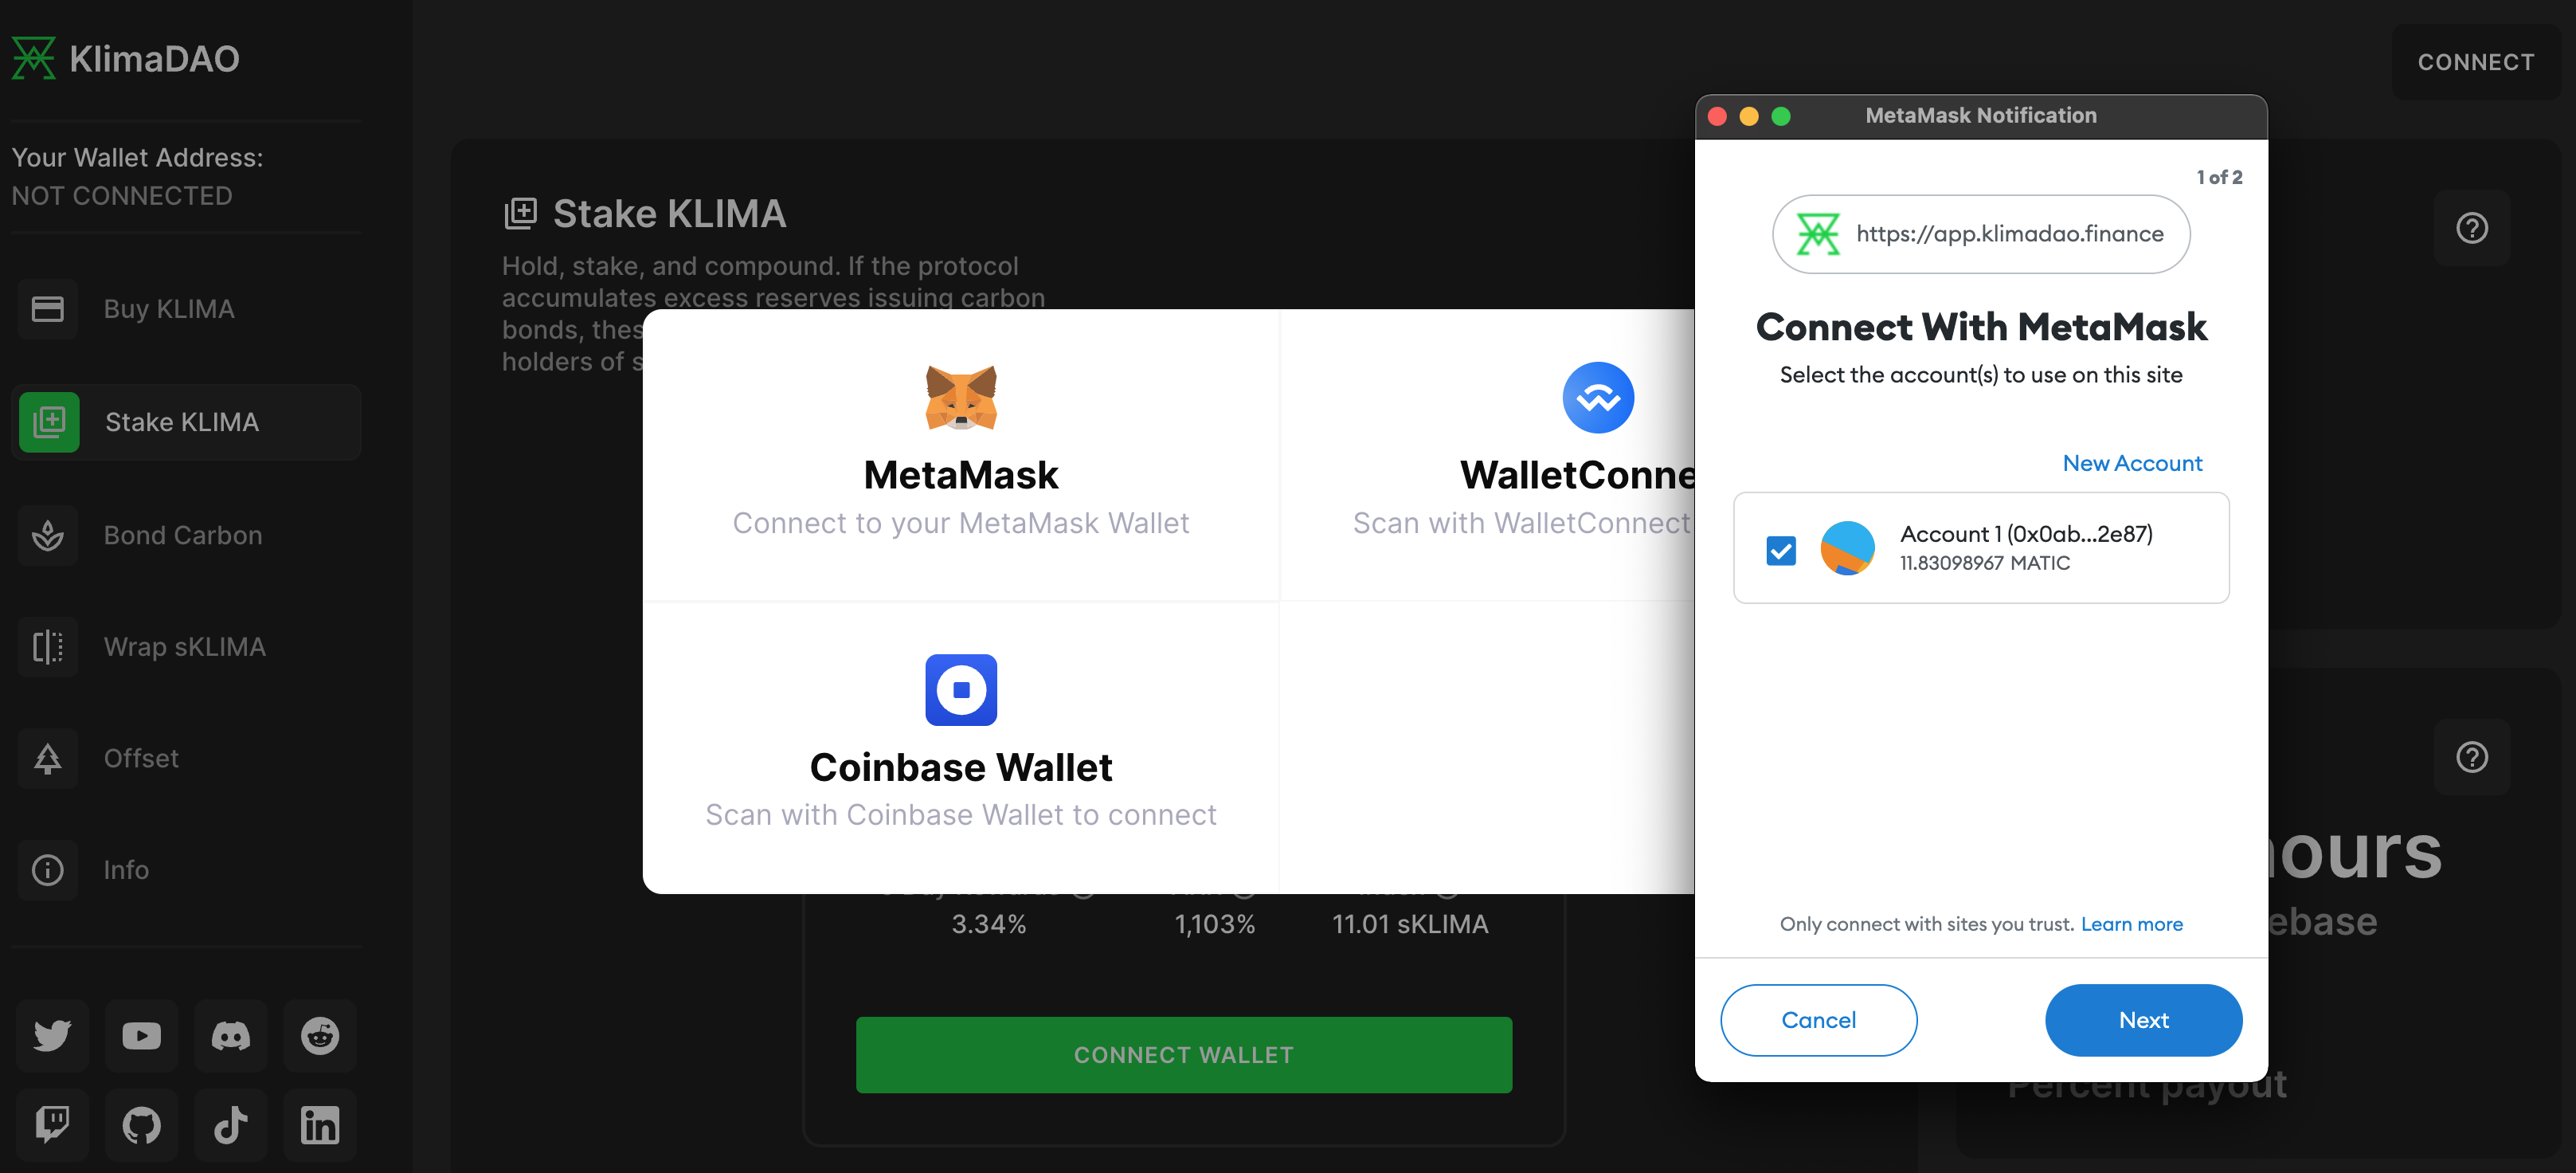 Connect your wallet to let the dapp see your $KLIMA token balance